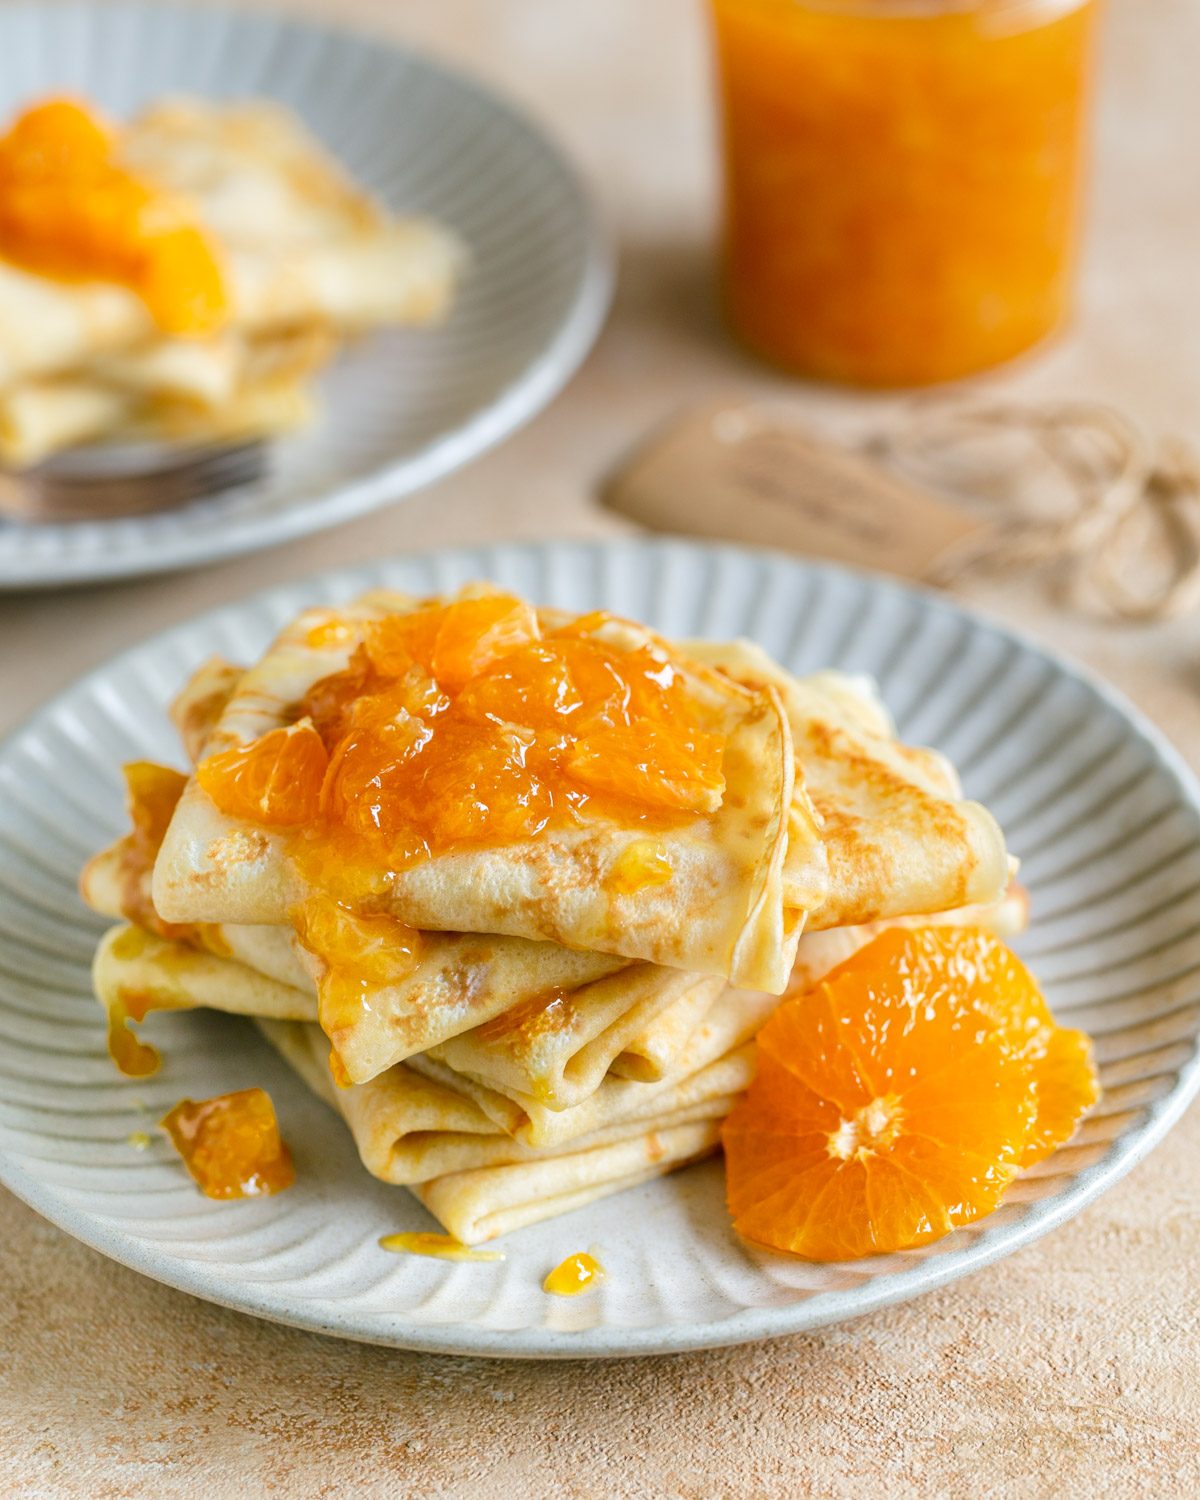 Parisian Crepes with Mandarin on a plate